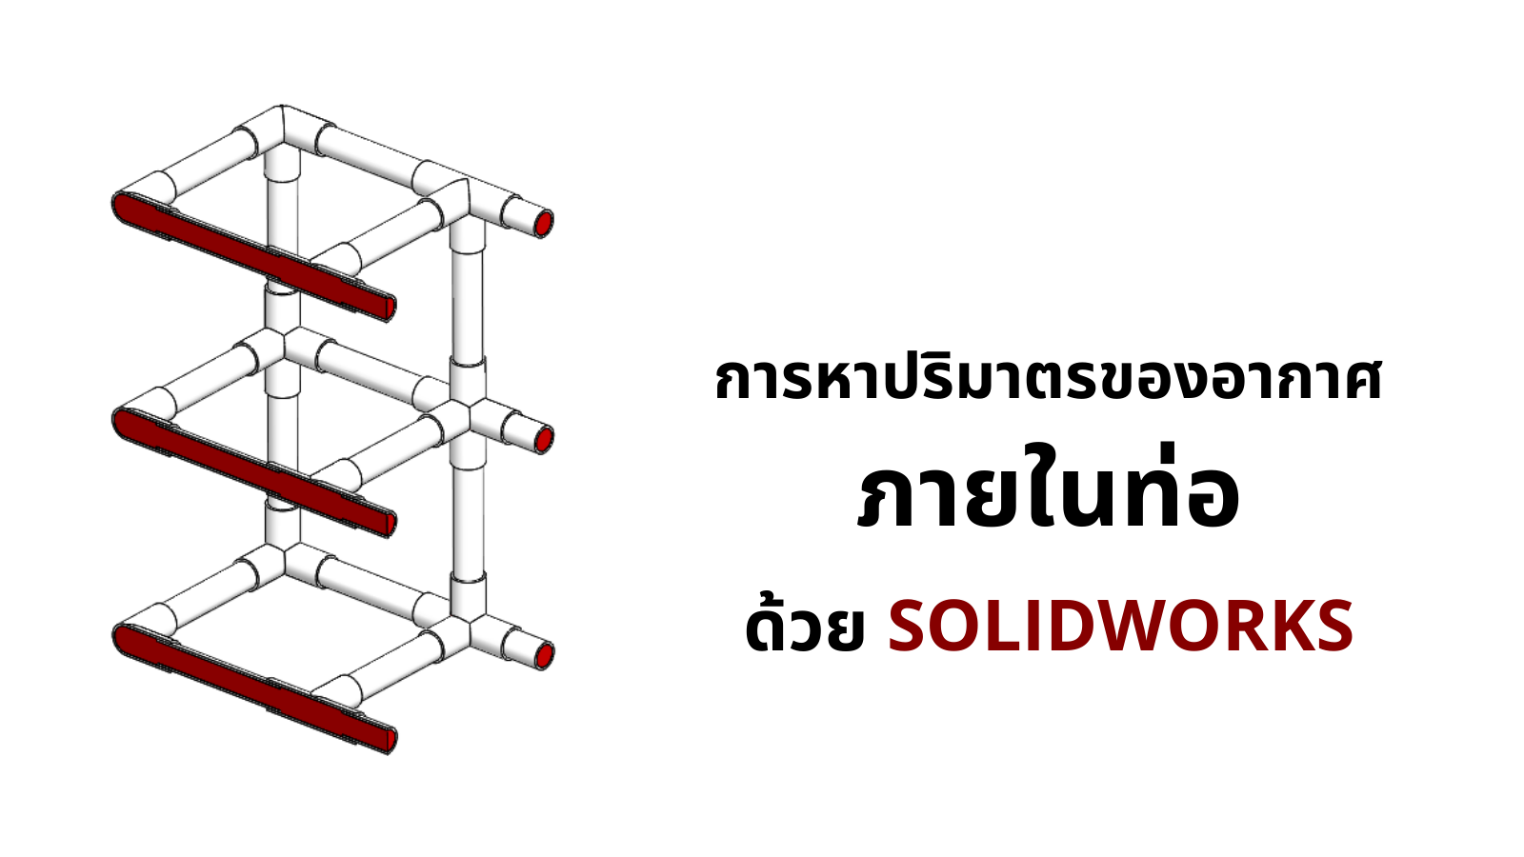 Flow-in-tube-solidworks1